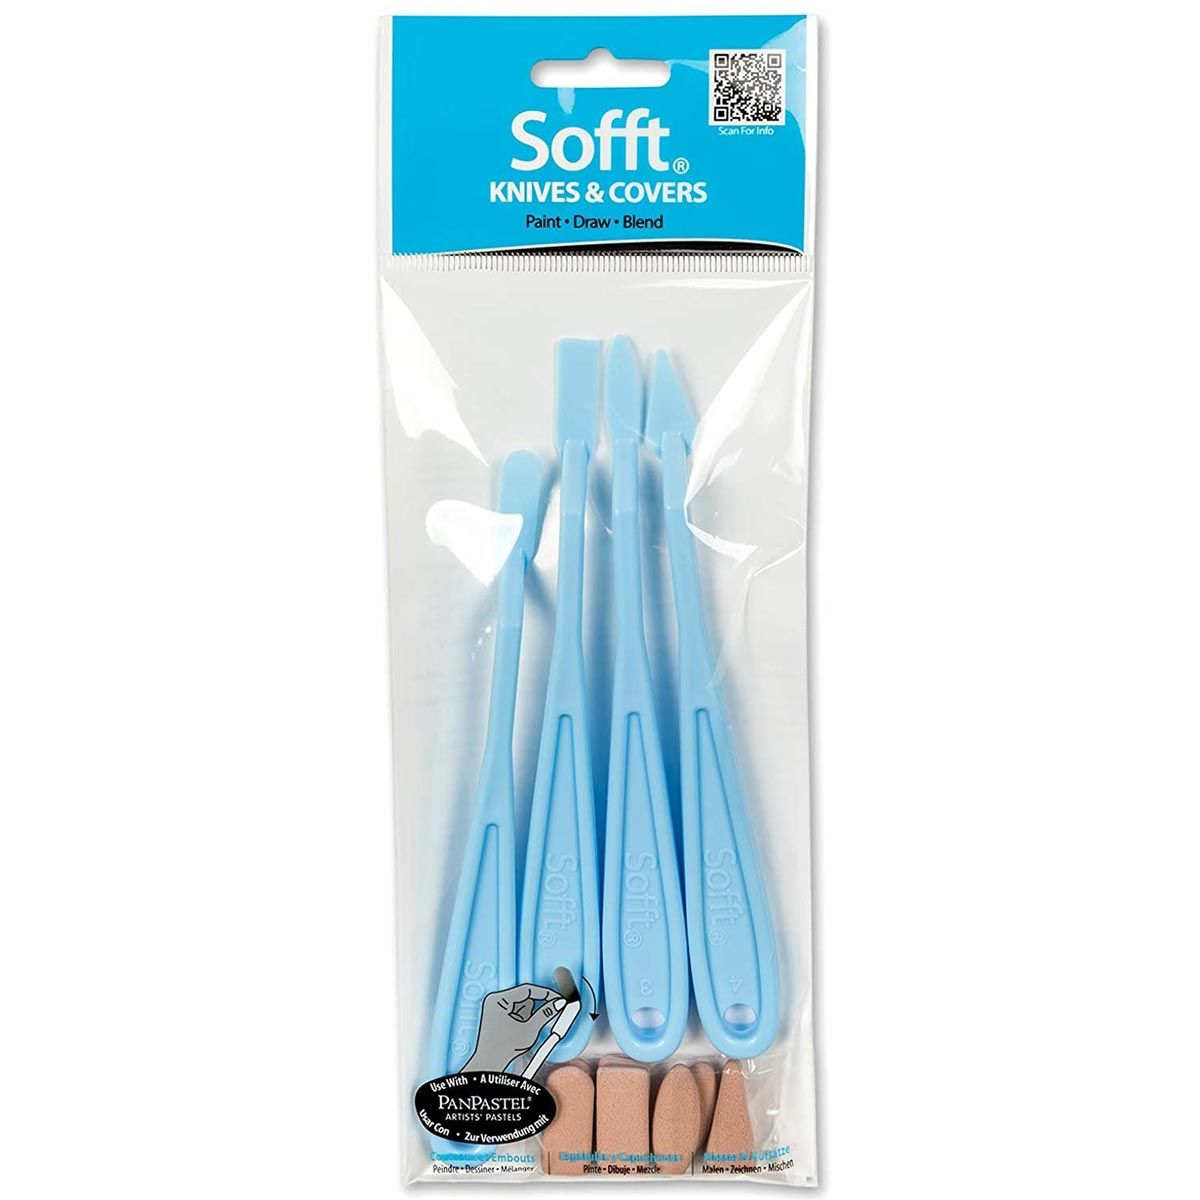 Sofft Tool Knives Set of 4 knives and 8 Covers Pack